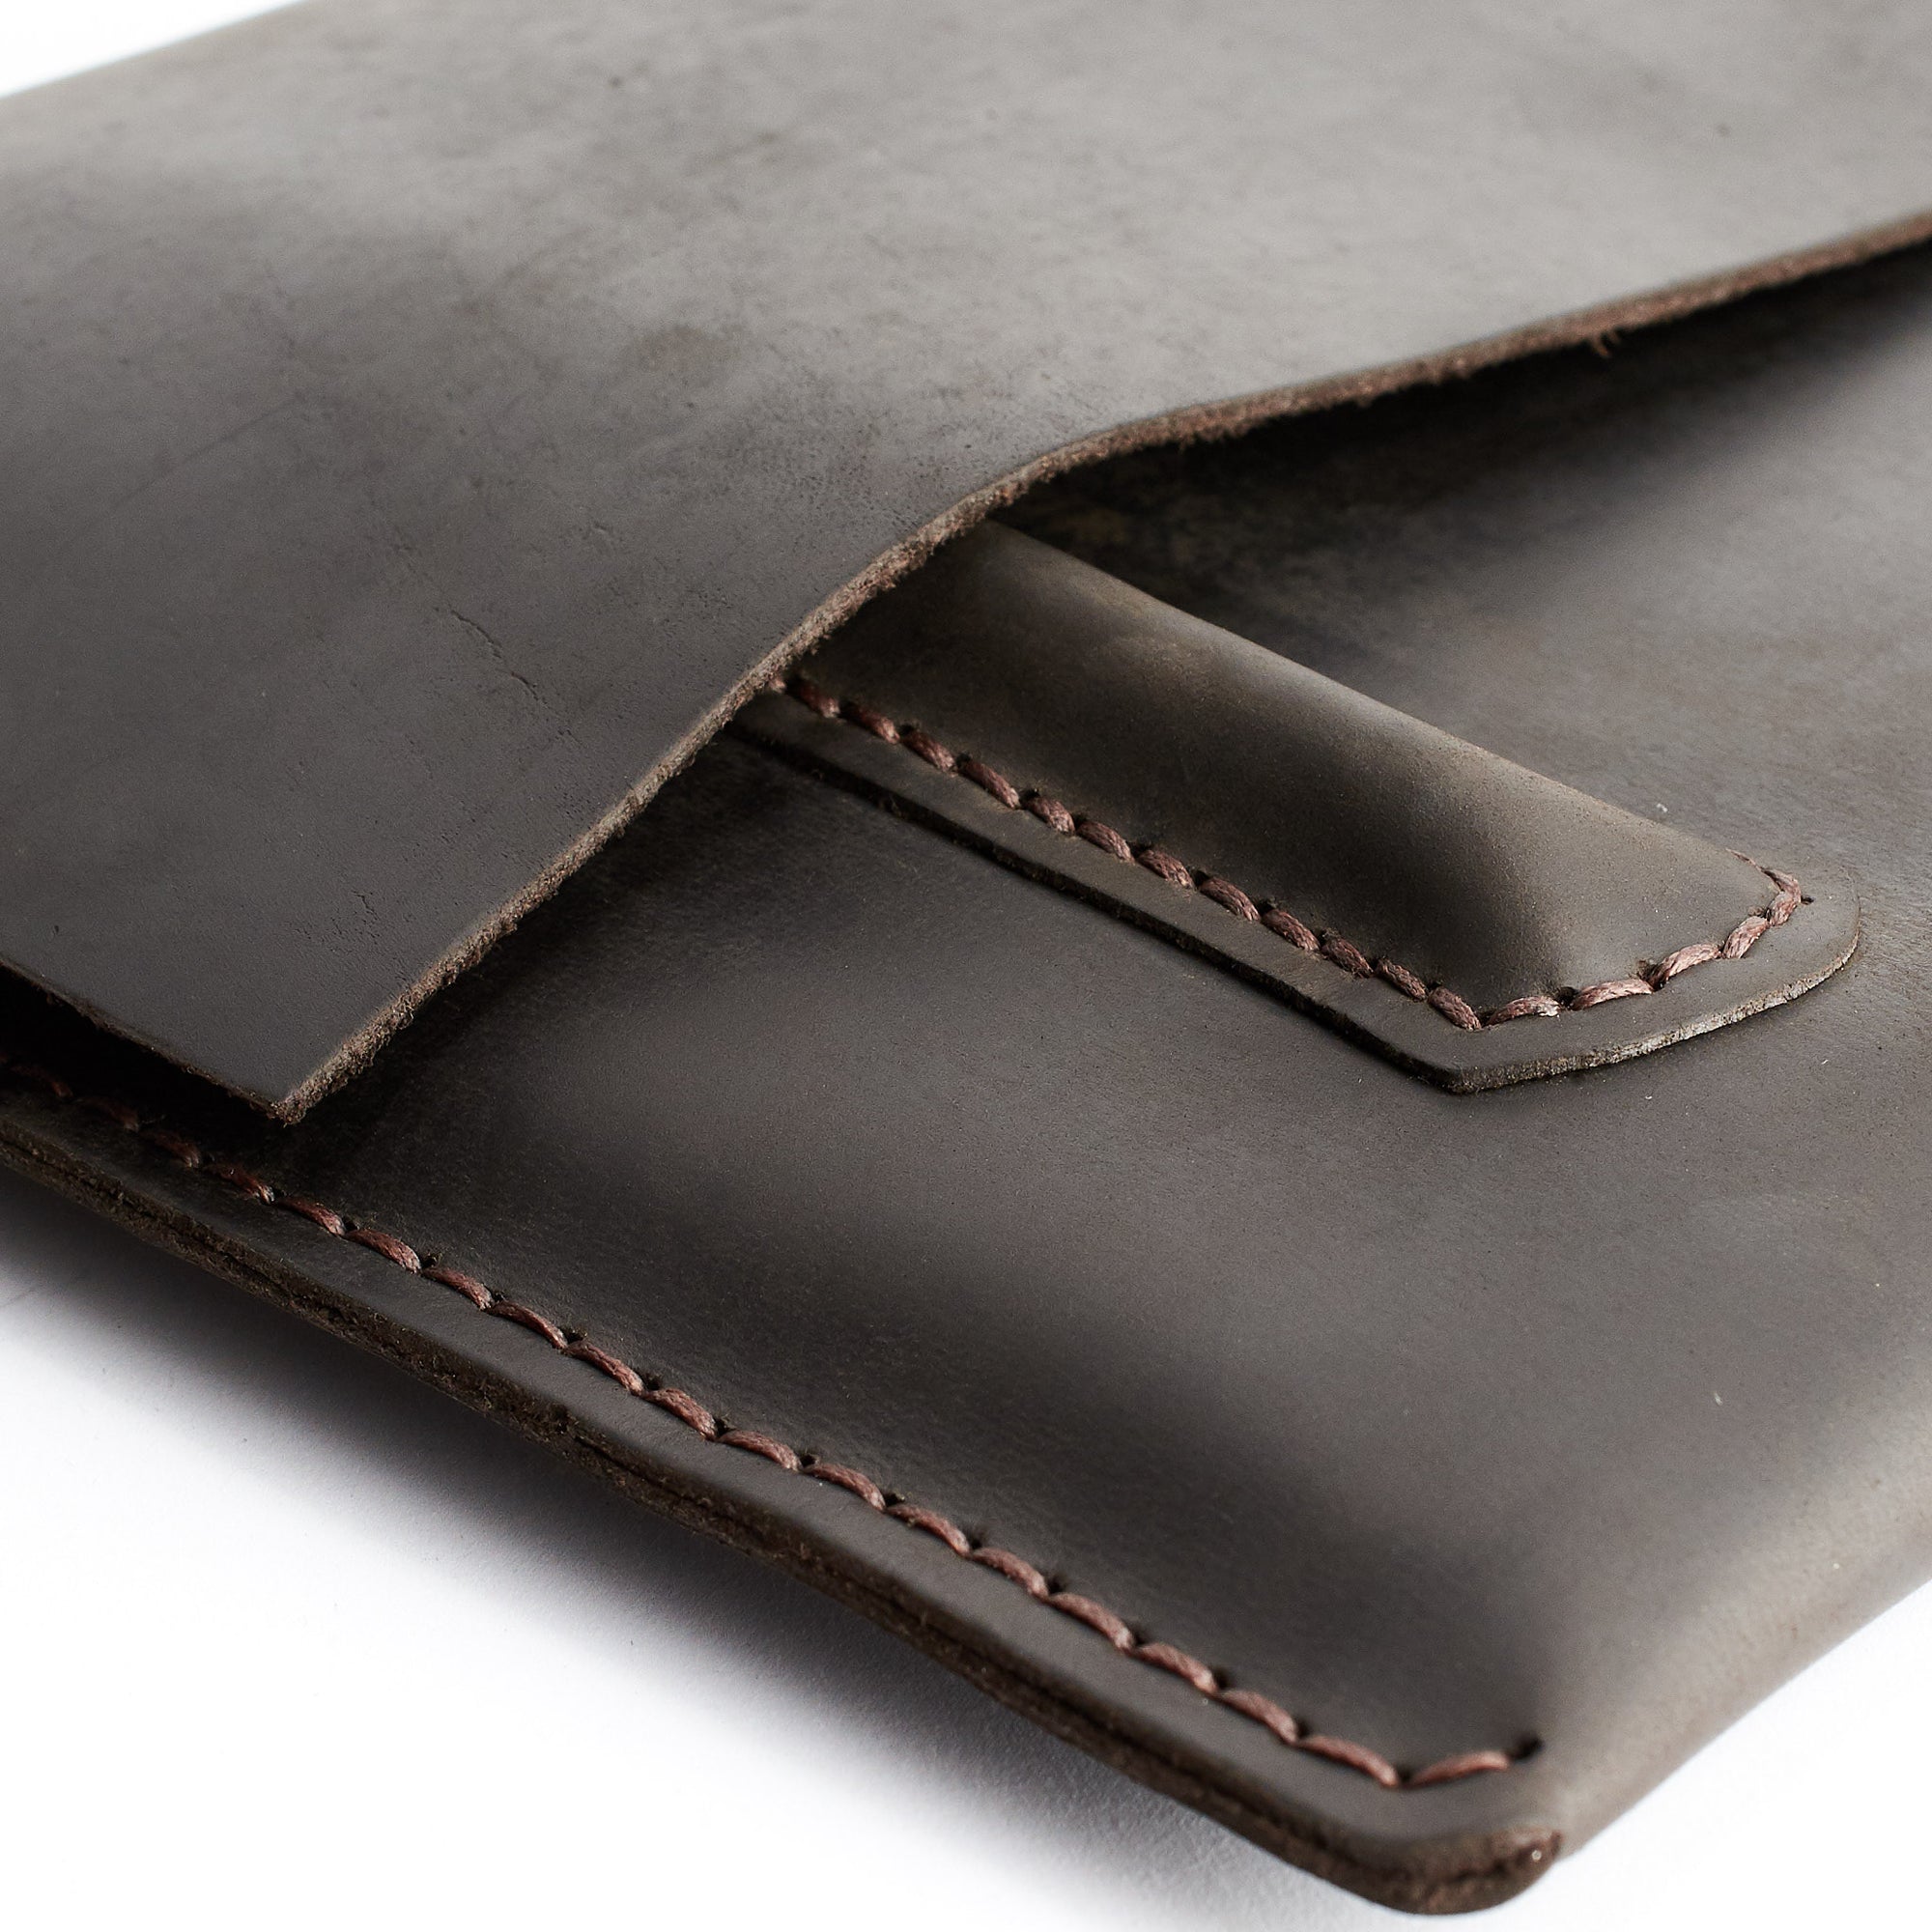 Hand Stitched. iPad Sleeve. iPad Leather Case Brown With Apple Pencil Holder by Capra Leather